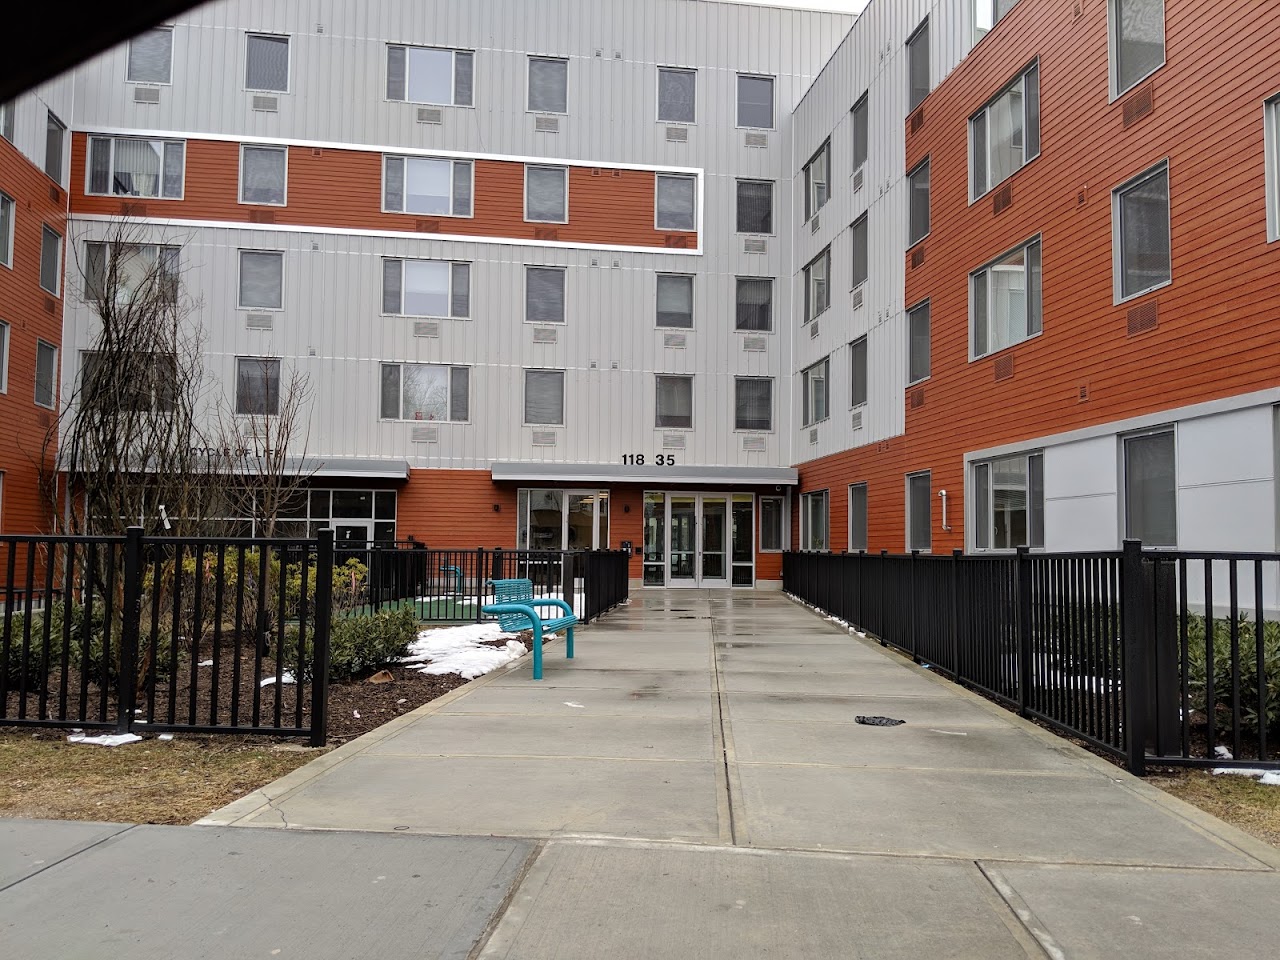 Photo of ST. ALBANS CYCLE OF LIFE. Affordable housing located at 118-35 FARMERS BLVD QUEENS, NY 11412